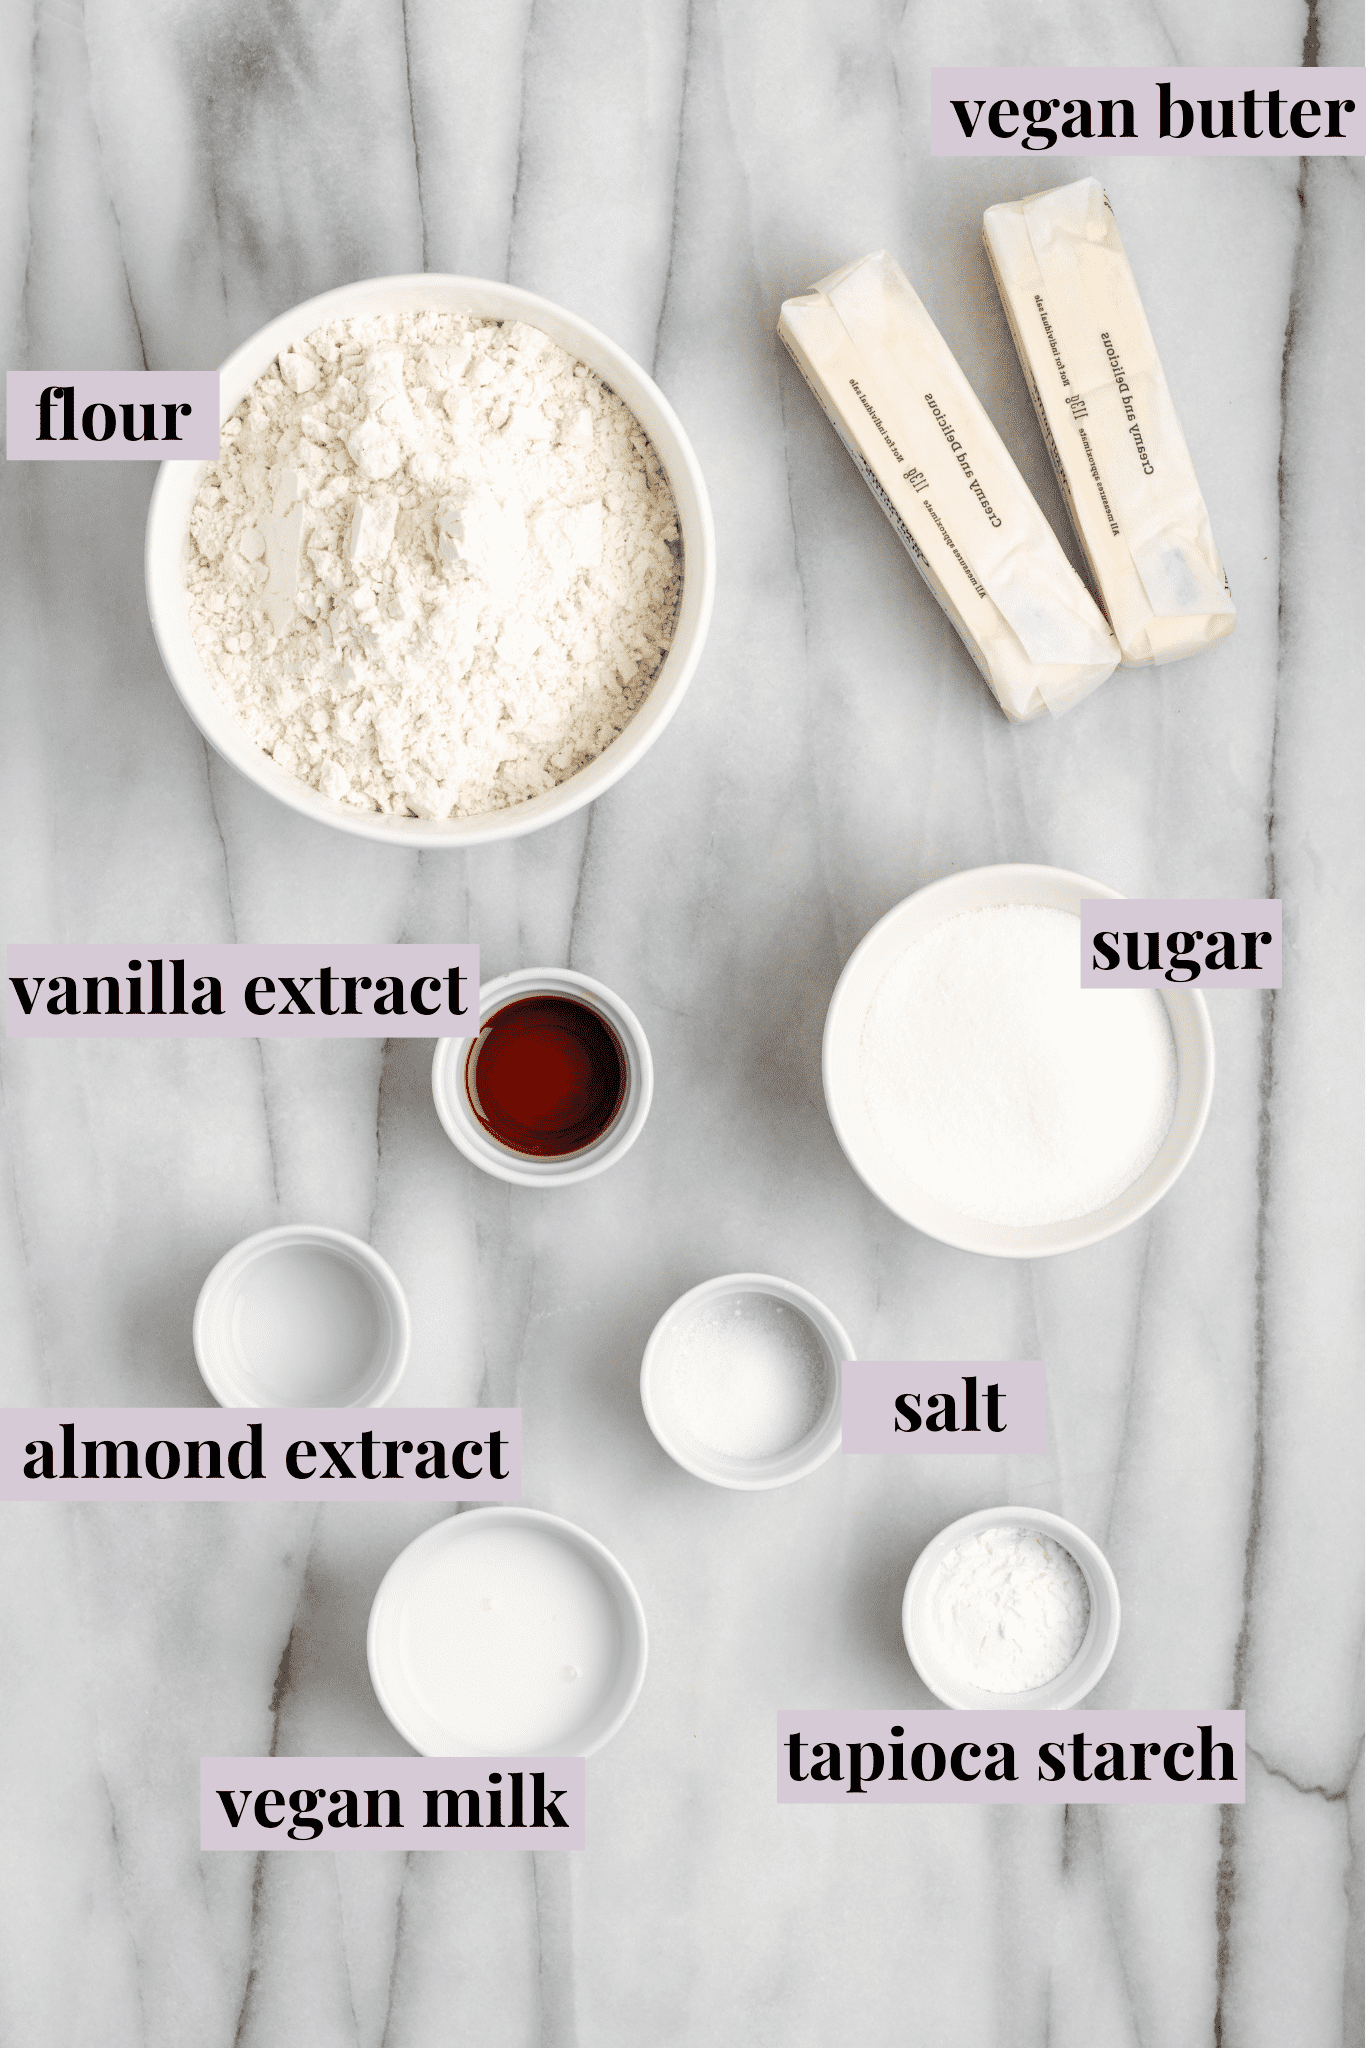 Overhead view of the ingredients for vegan spritz cookies: two sticks of vegan butter, a bowl of flour, a bowl of sugar, a bowl vegan milk, a bowl of cornstarch, a bowl of salt, a bowl of almond extract, and a bowl of vanilla extract